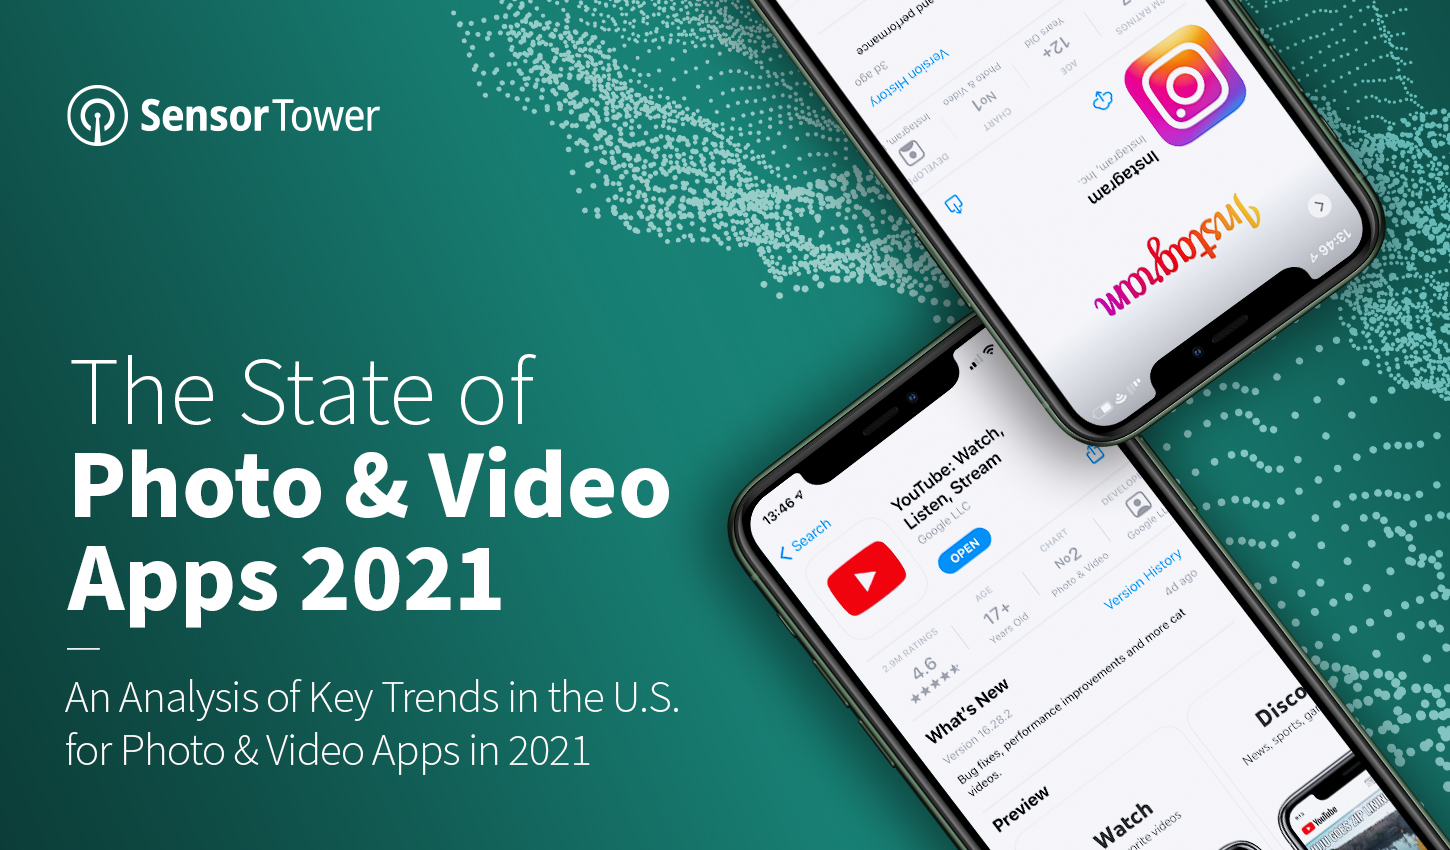 Takeaways from Sensor Tower's 2021 State of Photo & Video Apps report.